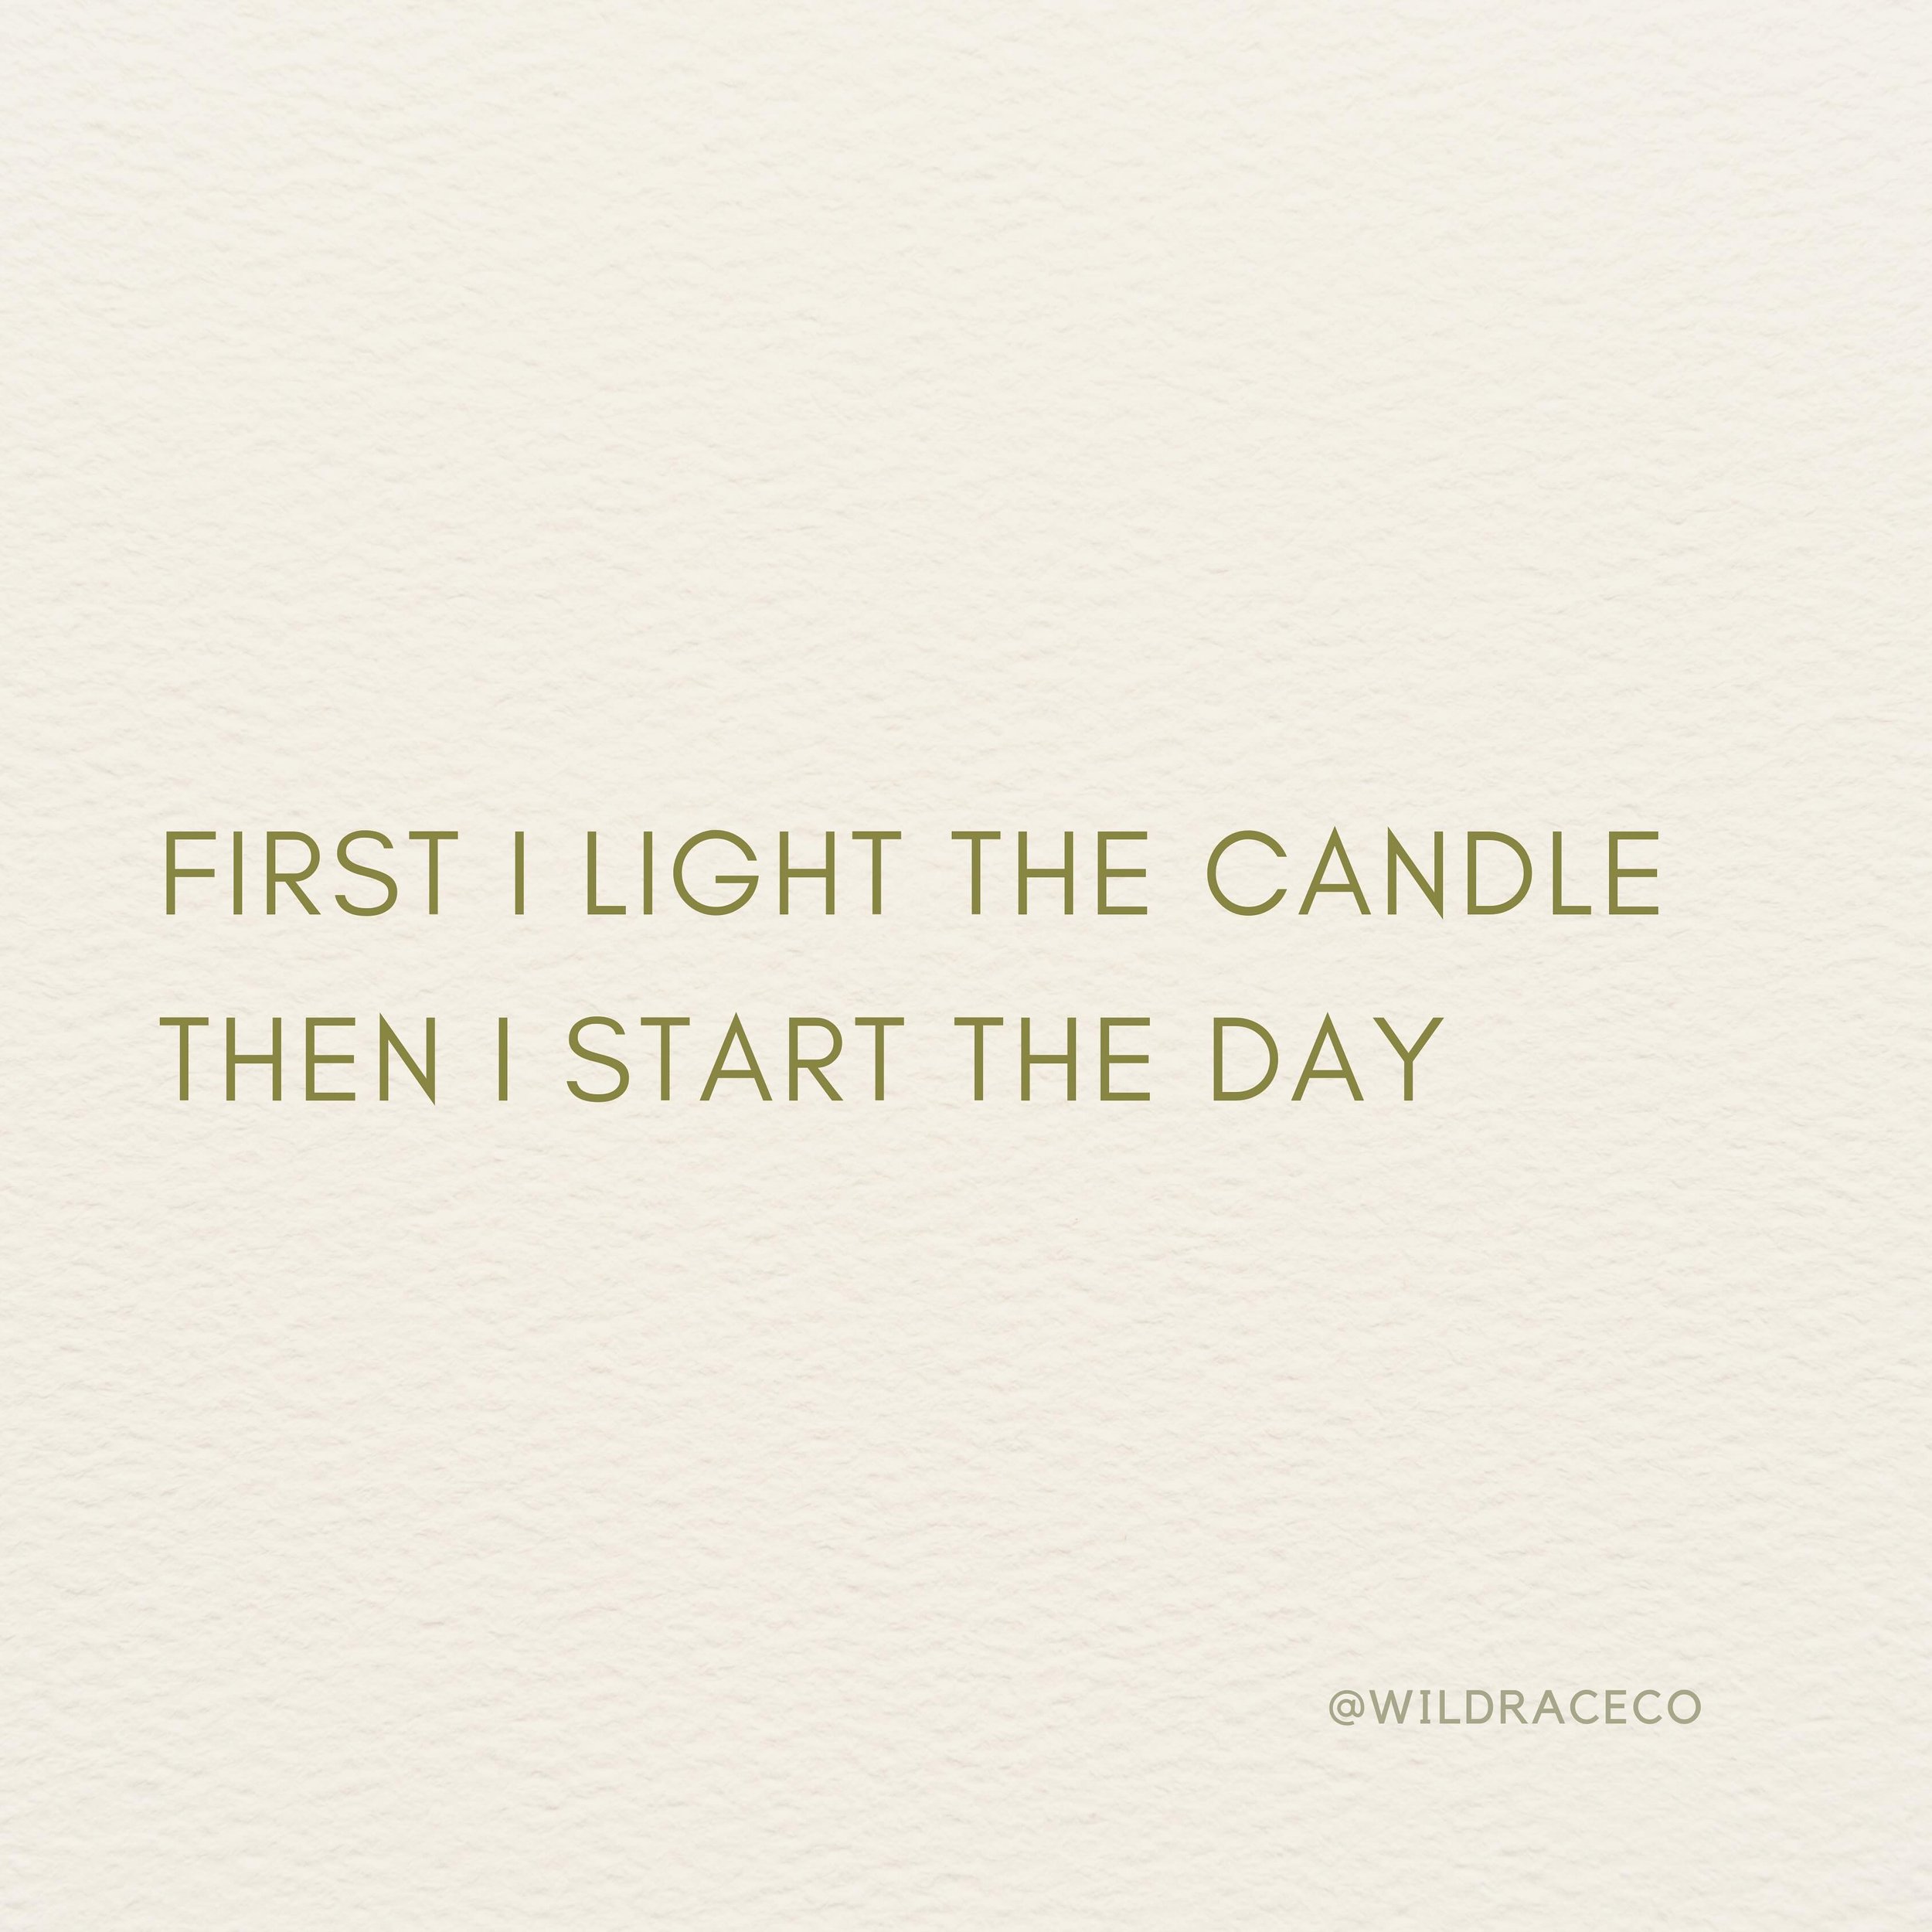 Priorities 🤍 

Lighting a candle just brings a little light and calm to the hustle of the rest of the day ⛅️ 

#wildrace #candlebusiness #essexbusiness